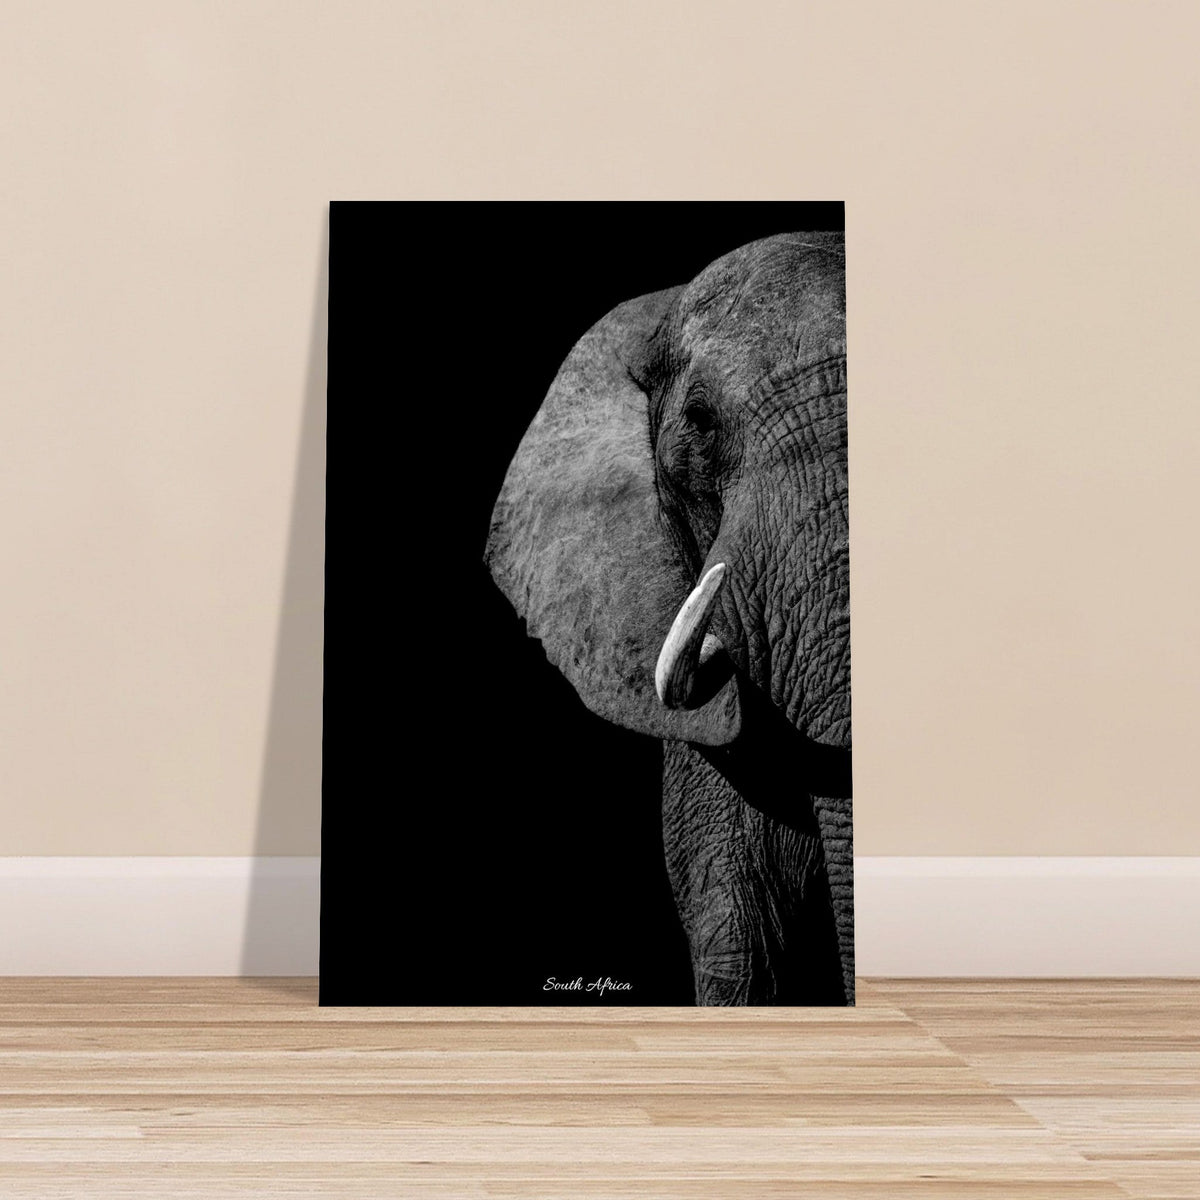 60x90 cm / 24x36″ Premium Matte Paper Poster Monochrome South African Elephant by Picture This